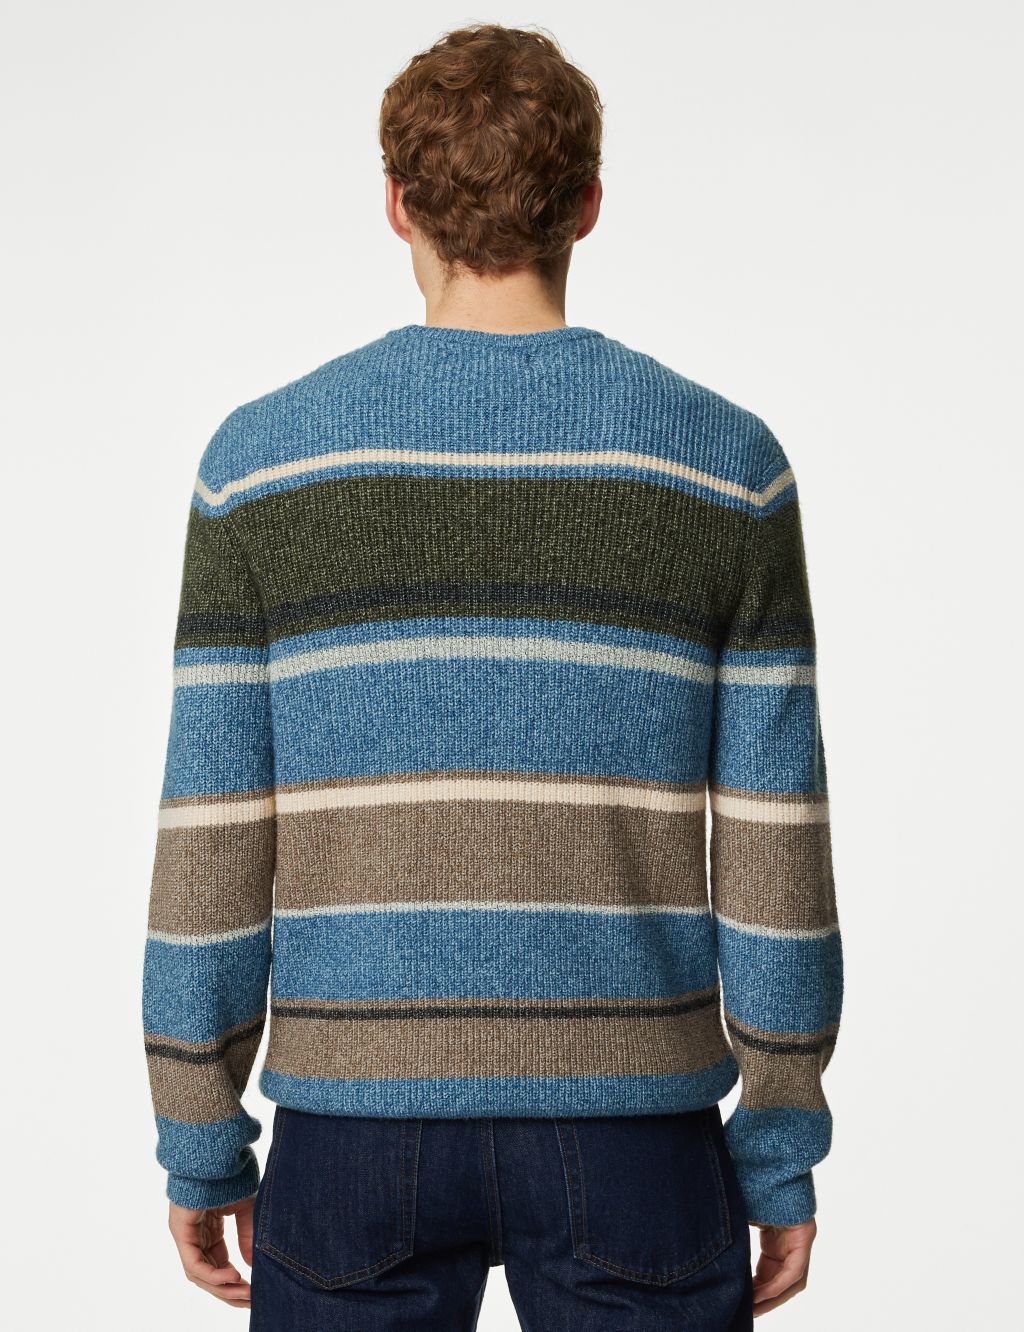 Supersoft Striped Chunky Crew Neck Jumper image 5